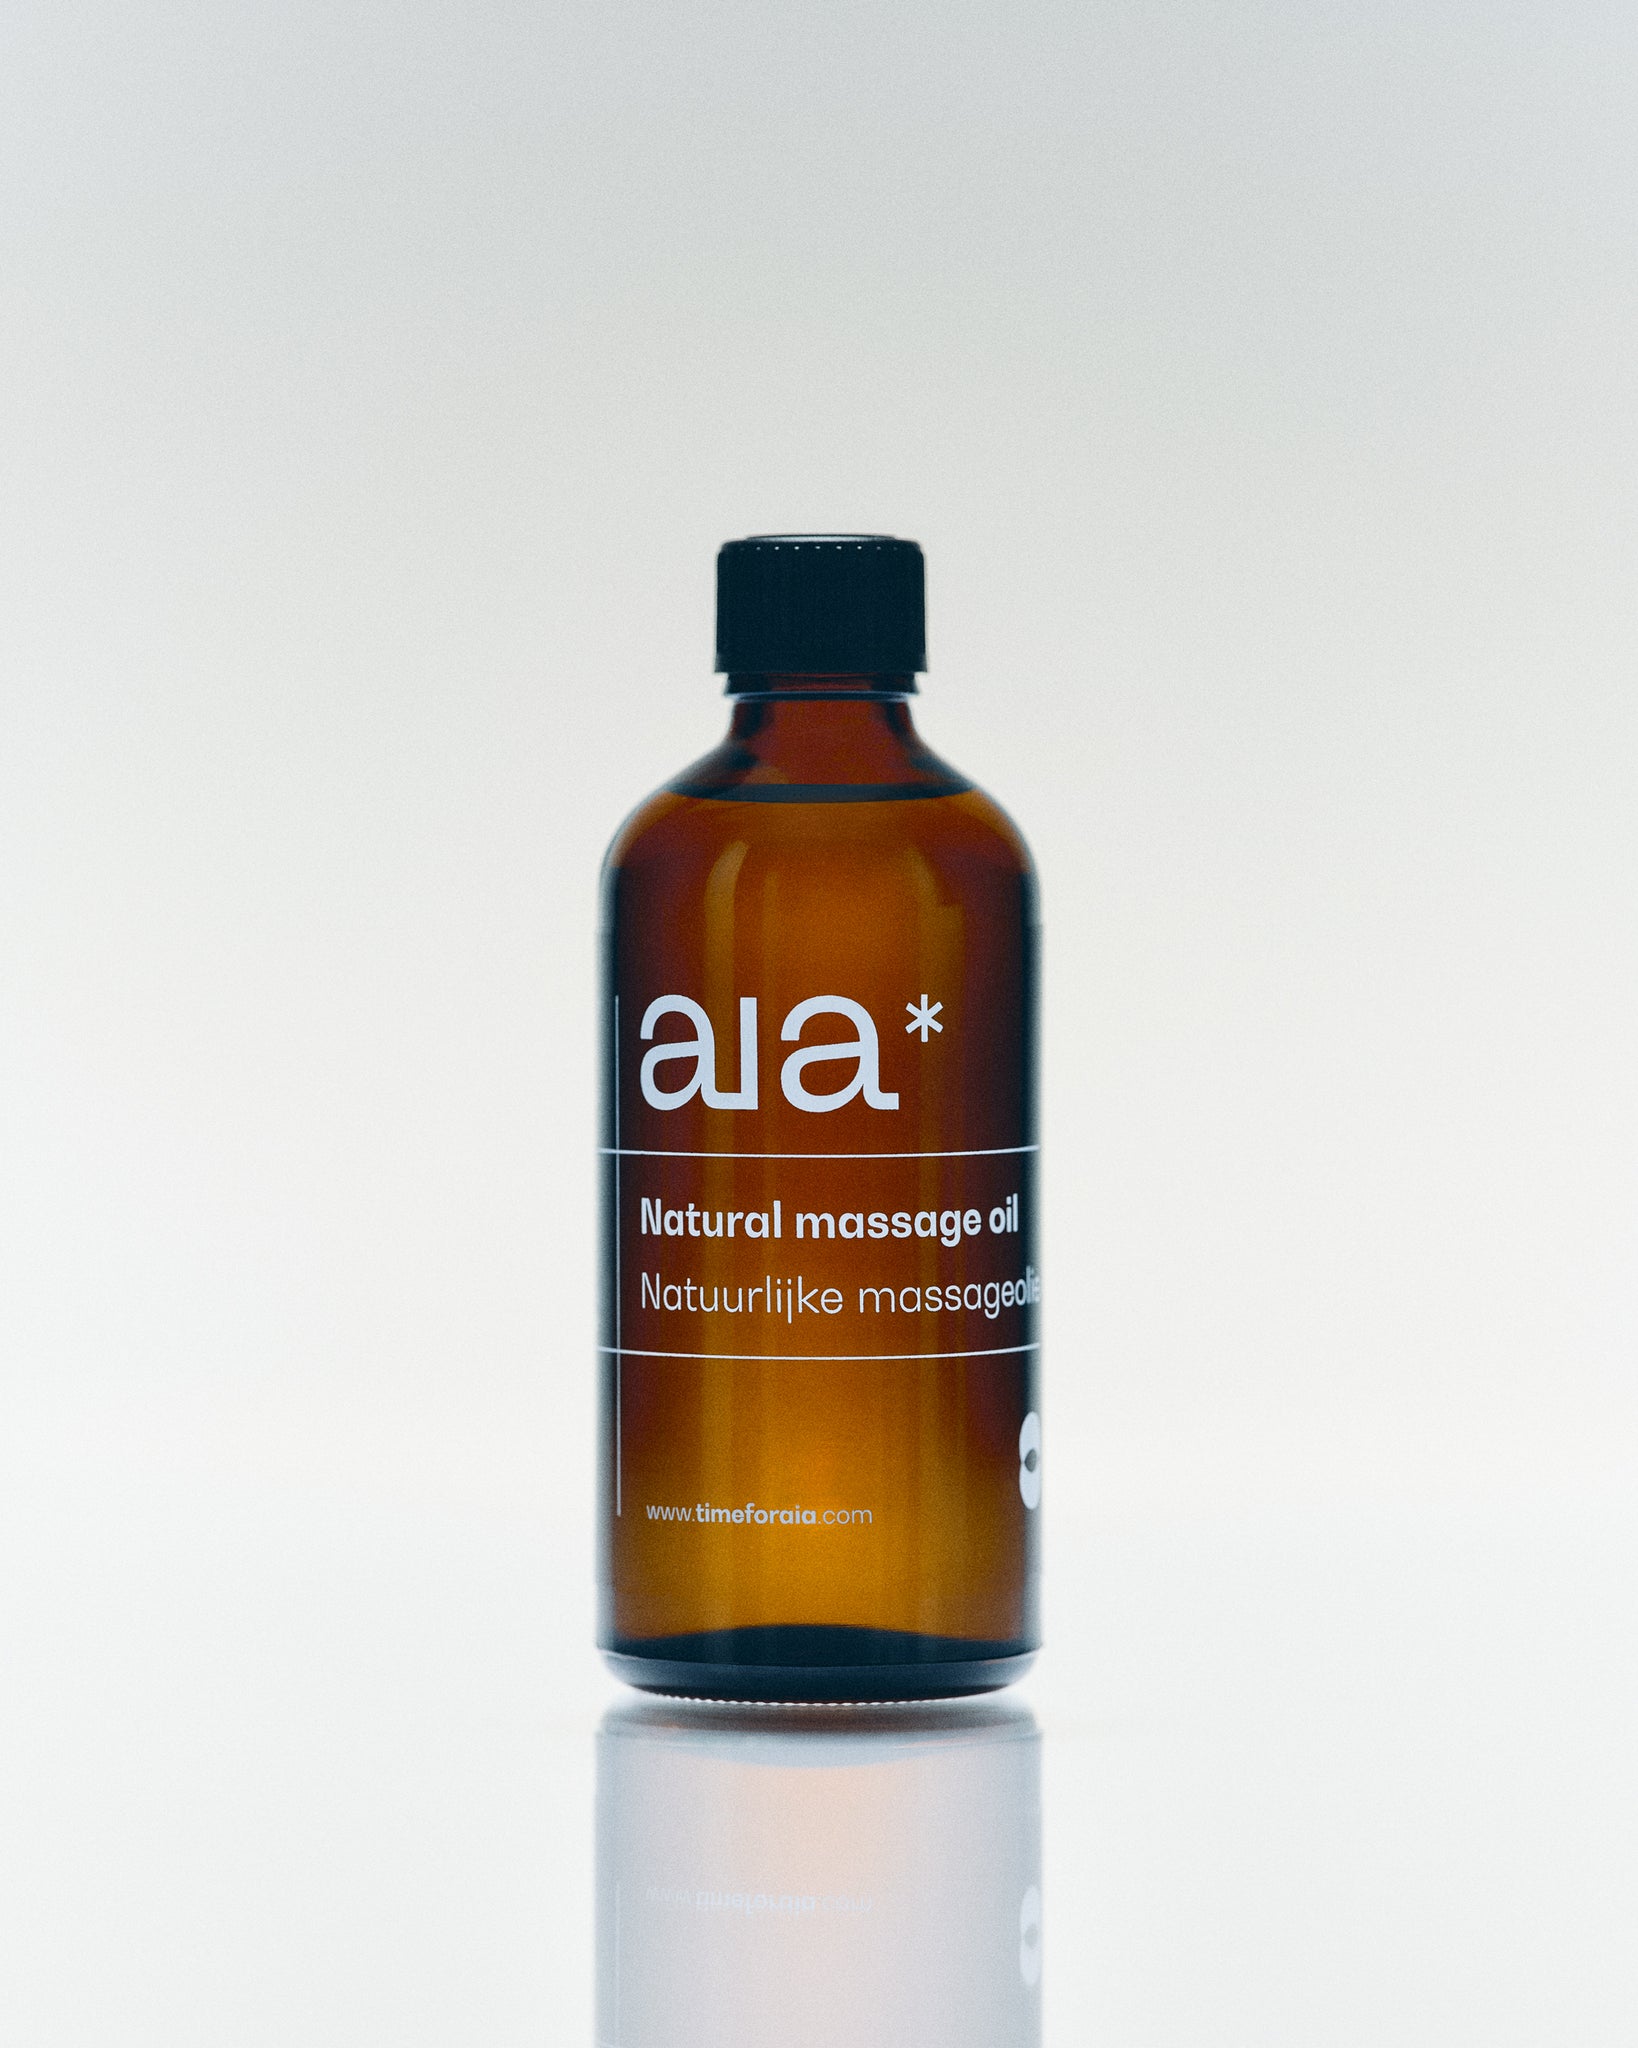 Aia* 100% natural massage oil on trus.store